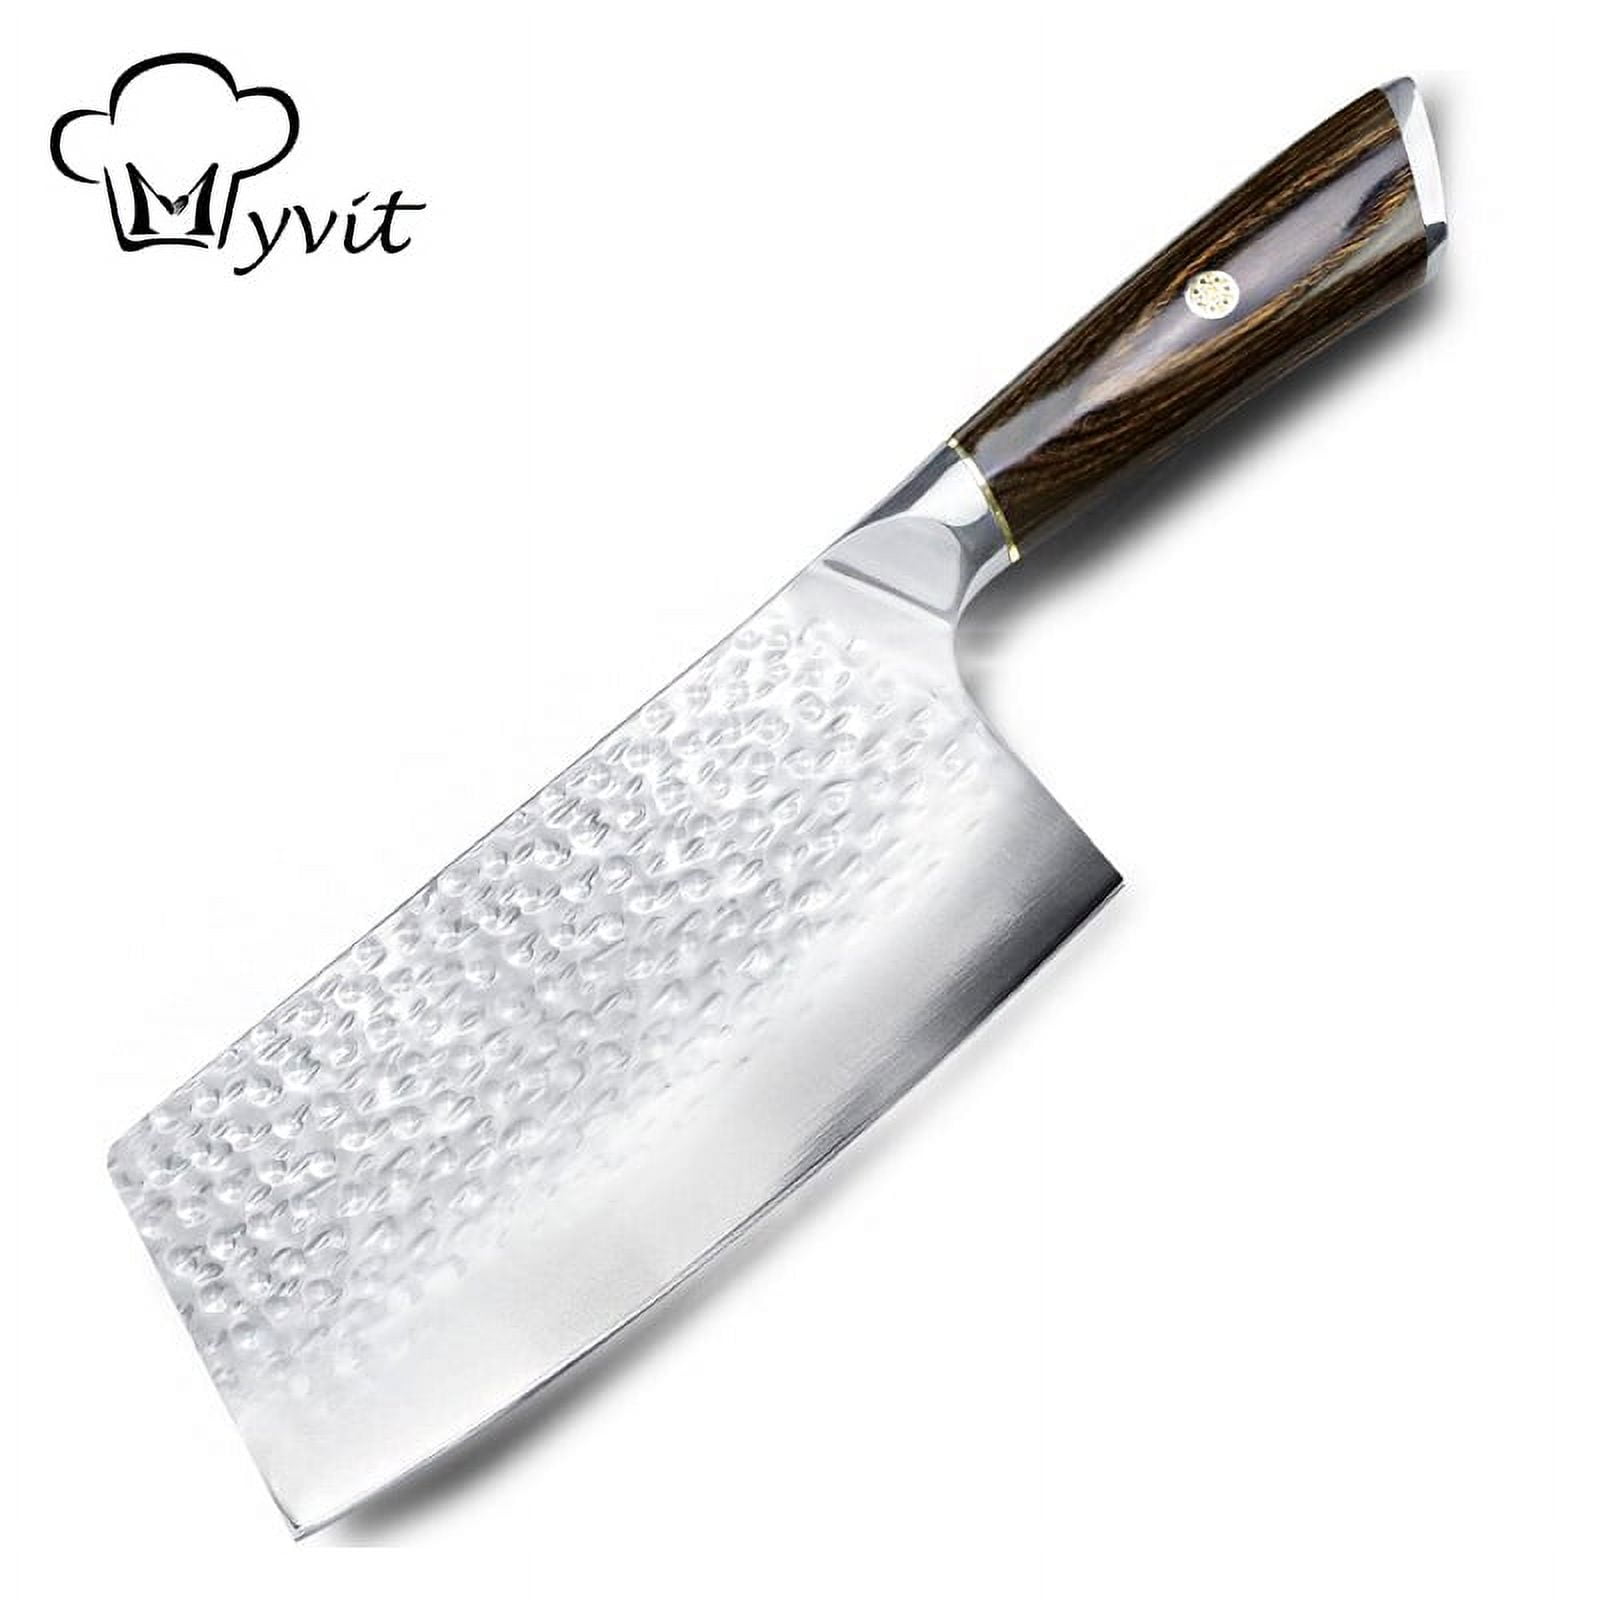 KITORY Meat Cleaver 7'' Heavy Duty Chopper Butcher Knife Cutter Chinese  Kitchen Chef Chopping Knives High Carbon Stainless Steel